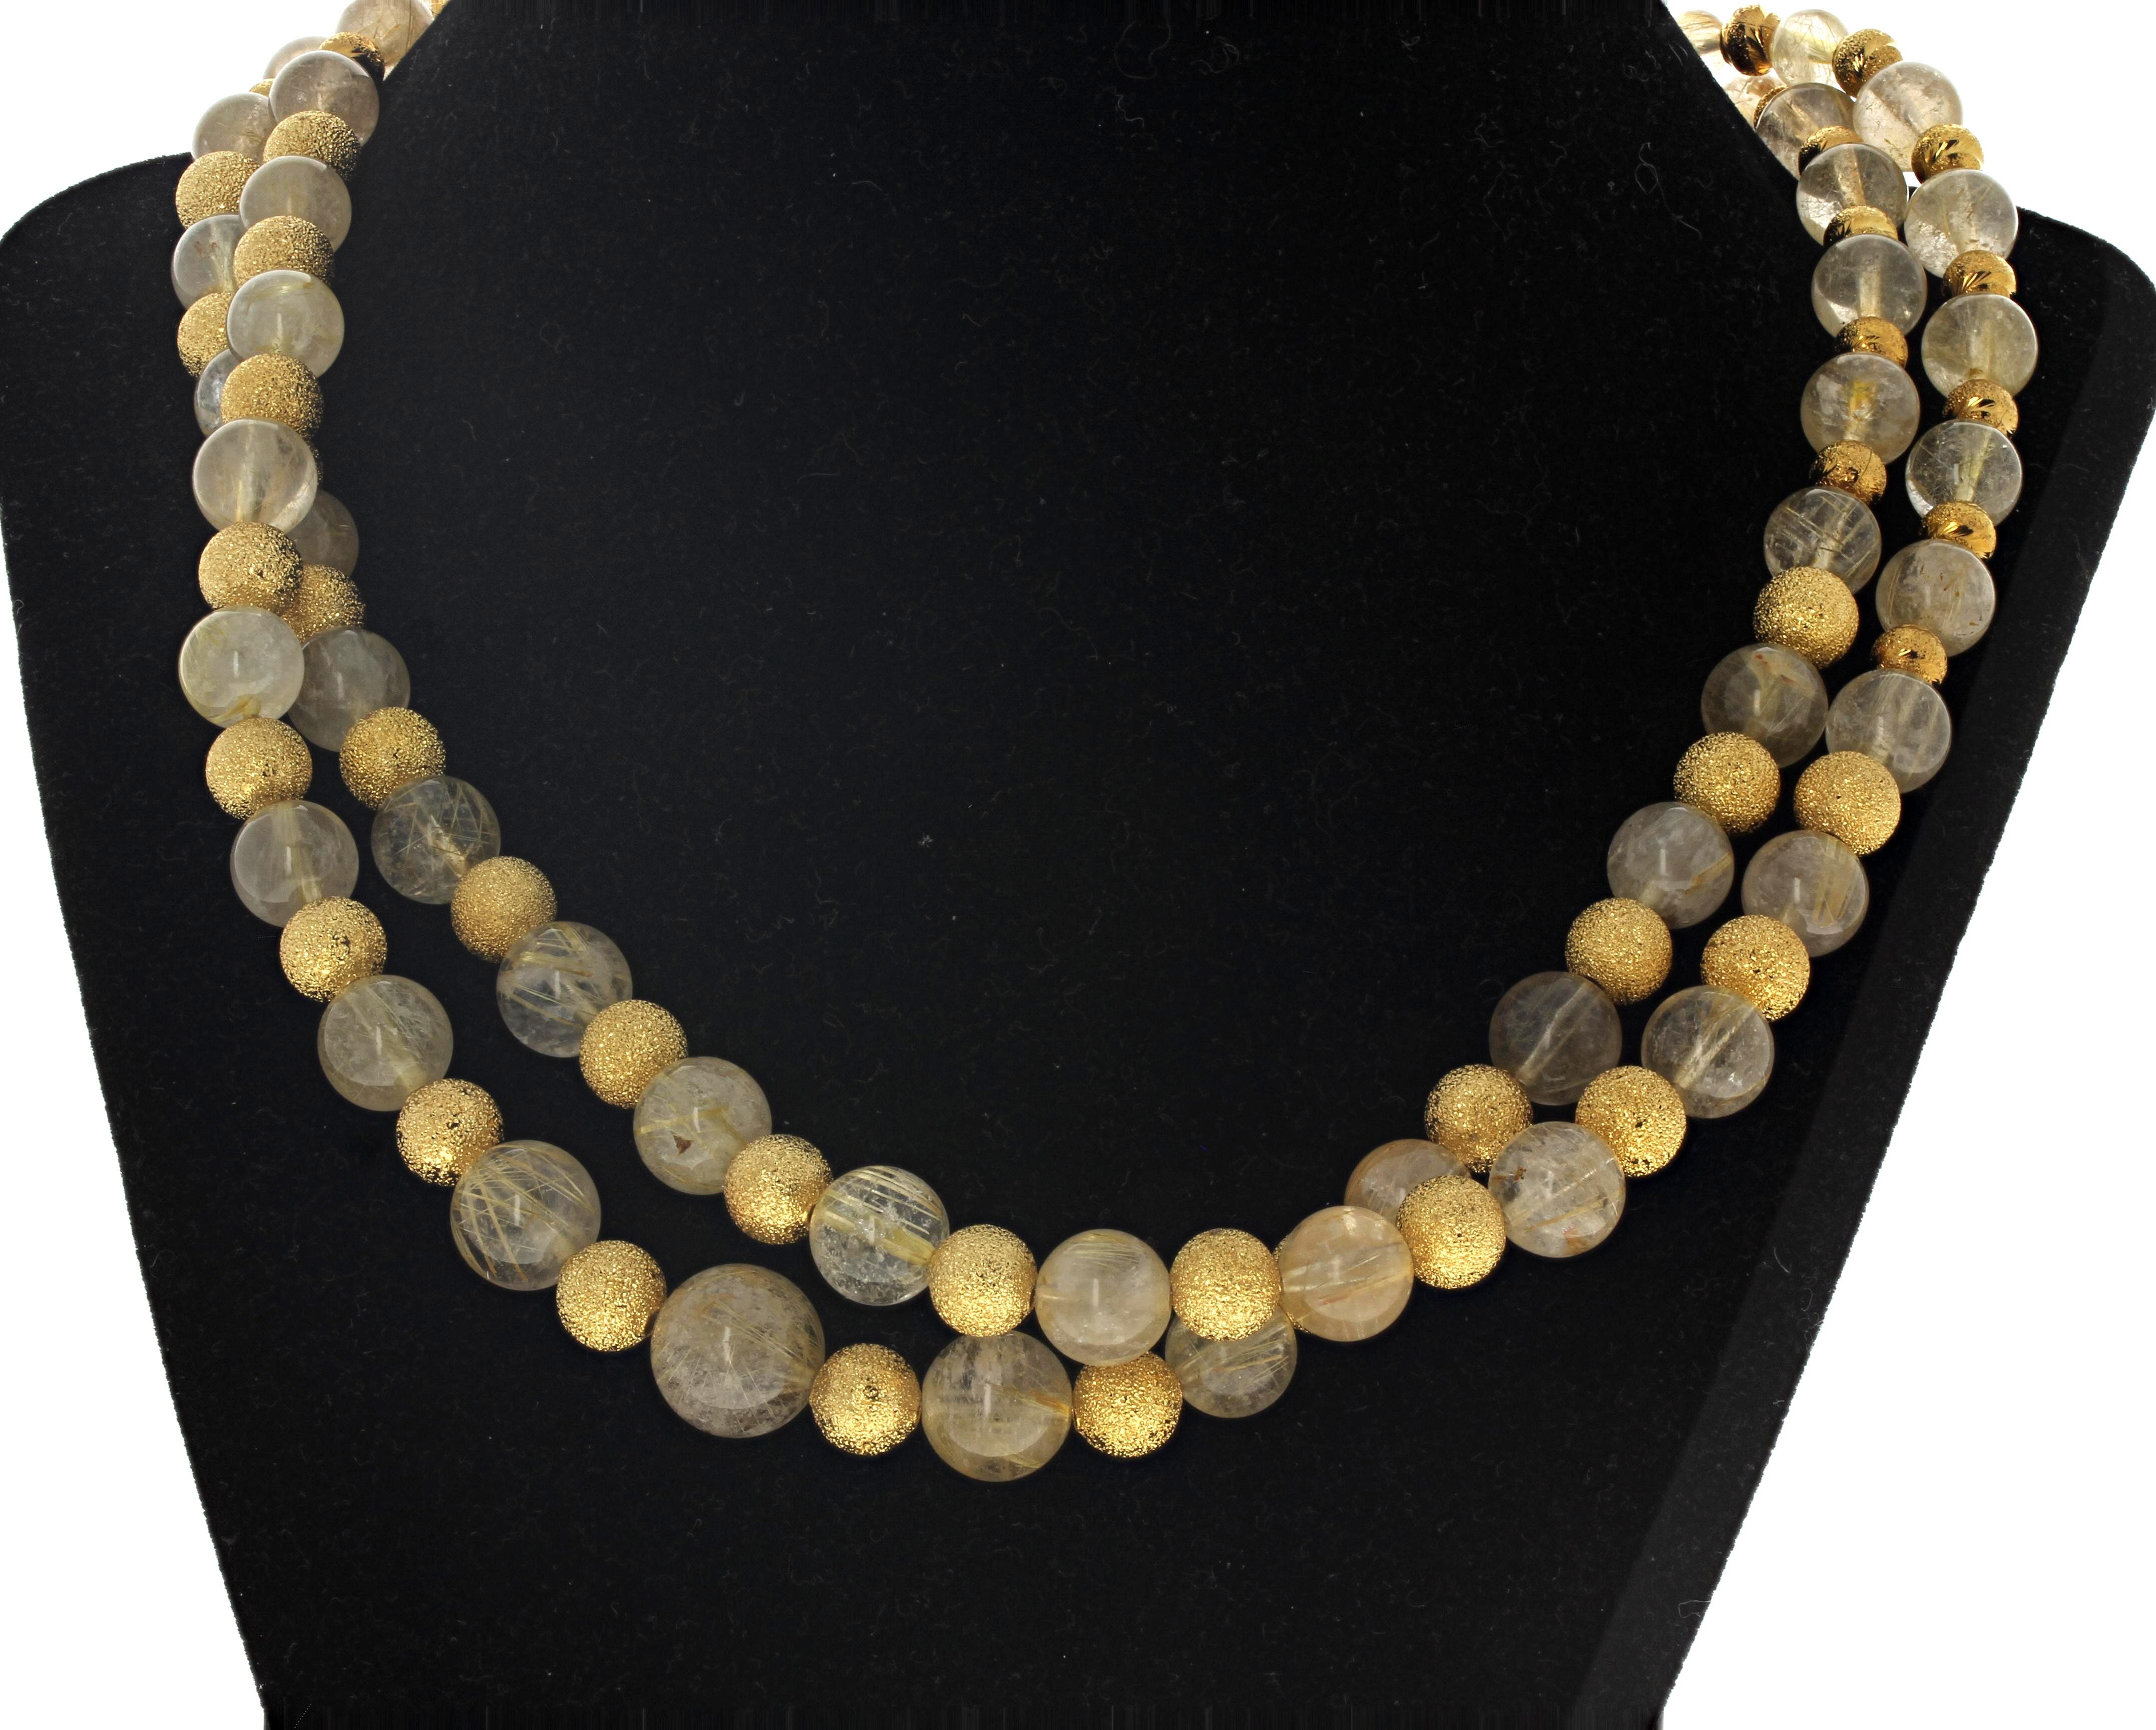 Round Cut AJD Double Strand of Glowing Rutilated Quartz & Gold Plated Rondels 19